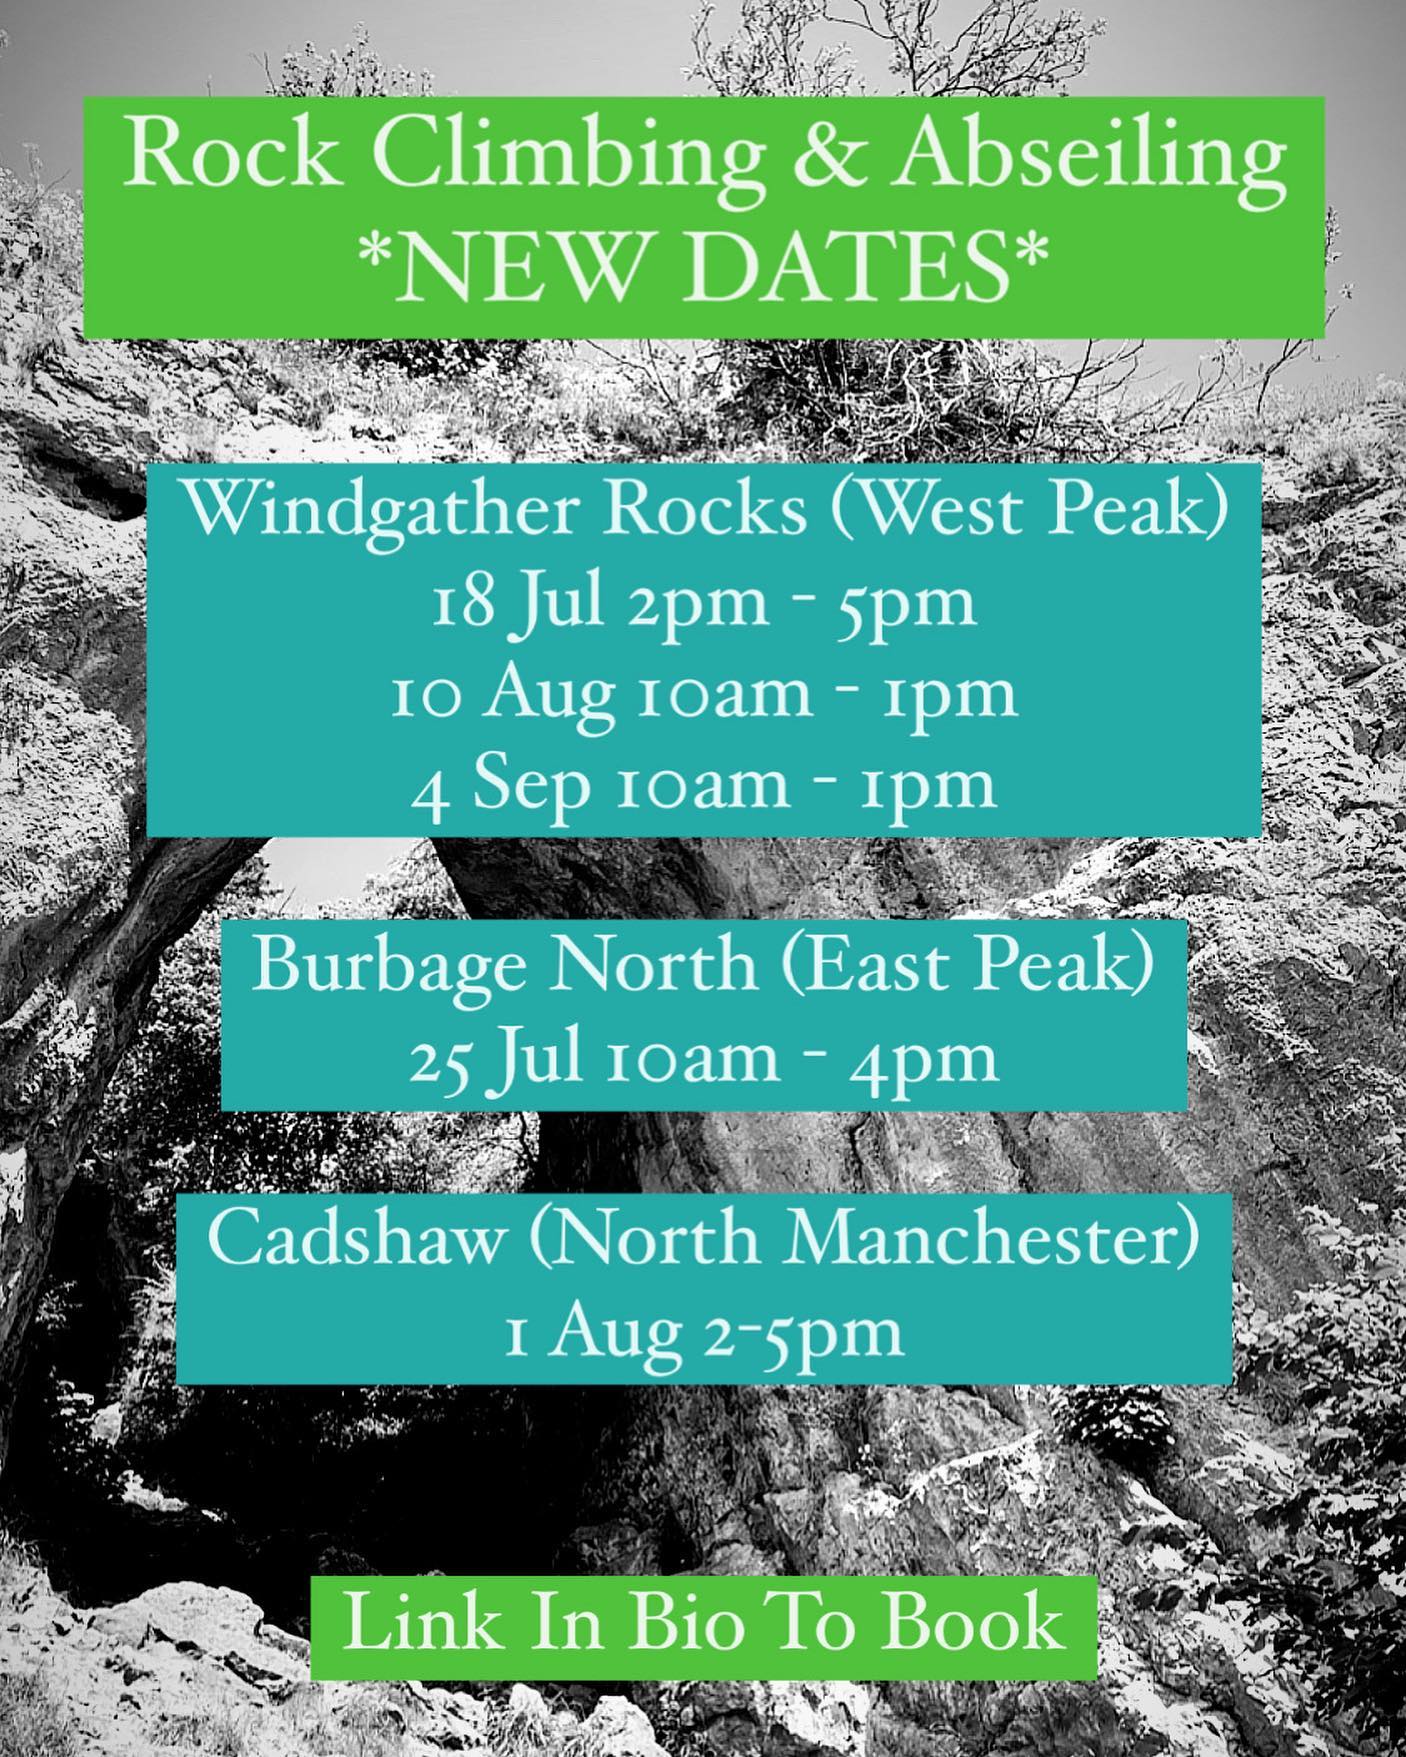 Join our friendly, qualified instructors for these sessions where you'll learn the basics of ropework, before climbing under their supervision. Then you'll need to be brave and challenge yourself to abseil back down (or walk down the path instead if you prefer!). Suitable for all from 10+, we hope to see you here!

More info and booking at www.wilderness-development.com, link in our bio 🧗‍♀️⛰🧗‍♀️
.
.
.
#wildernessdevelopment #smallbusiness #rockclimbing #climbing #scrambling #abseiling #trysomethingnew #peakdistrict #peakdistrictnationalpark #peakdistrictclimbing #mountainsfellsandhikes #roamtheuk #outdoorpursuits #outdooradventures #outdooractivities #nationalparksuk #booknow